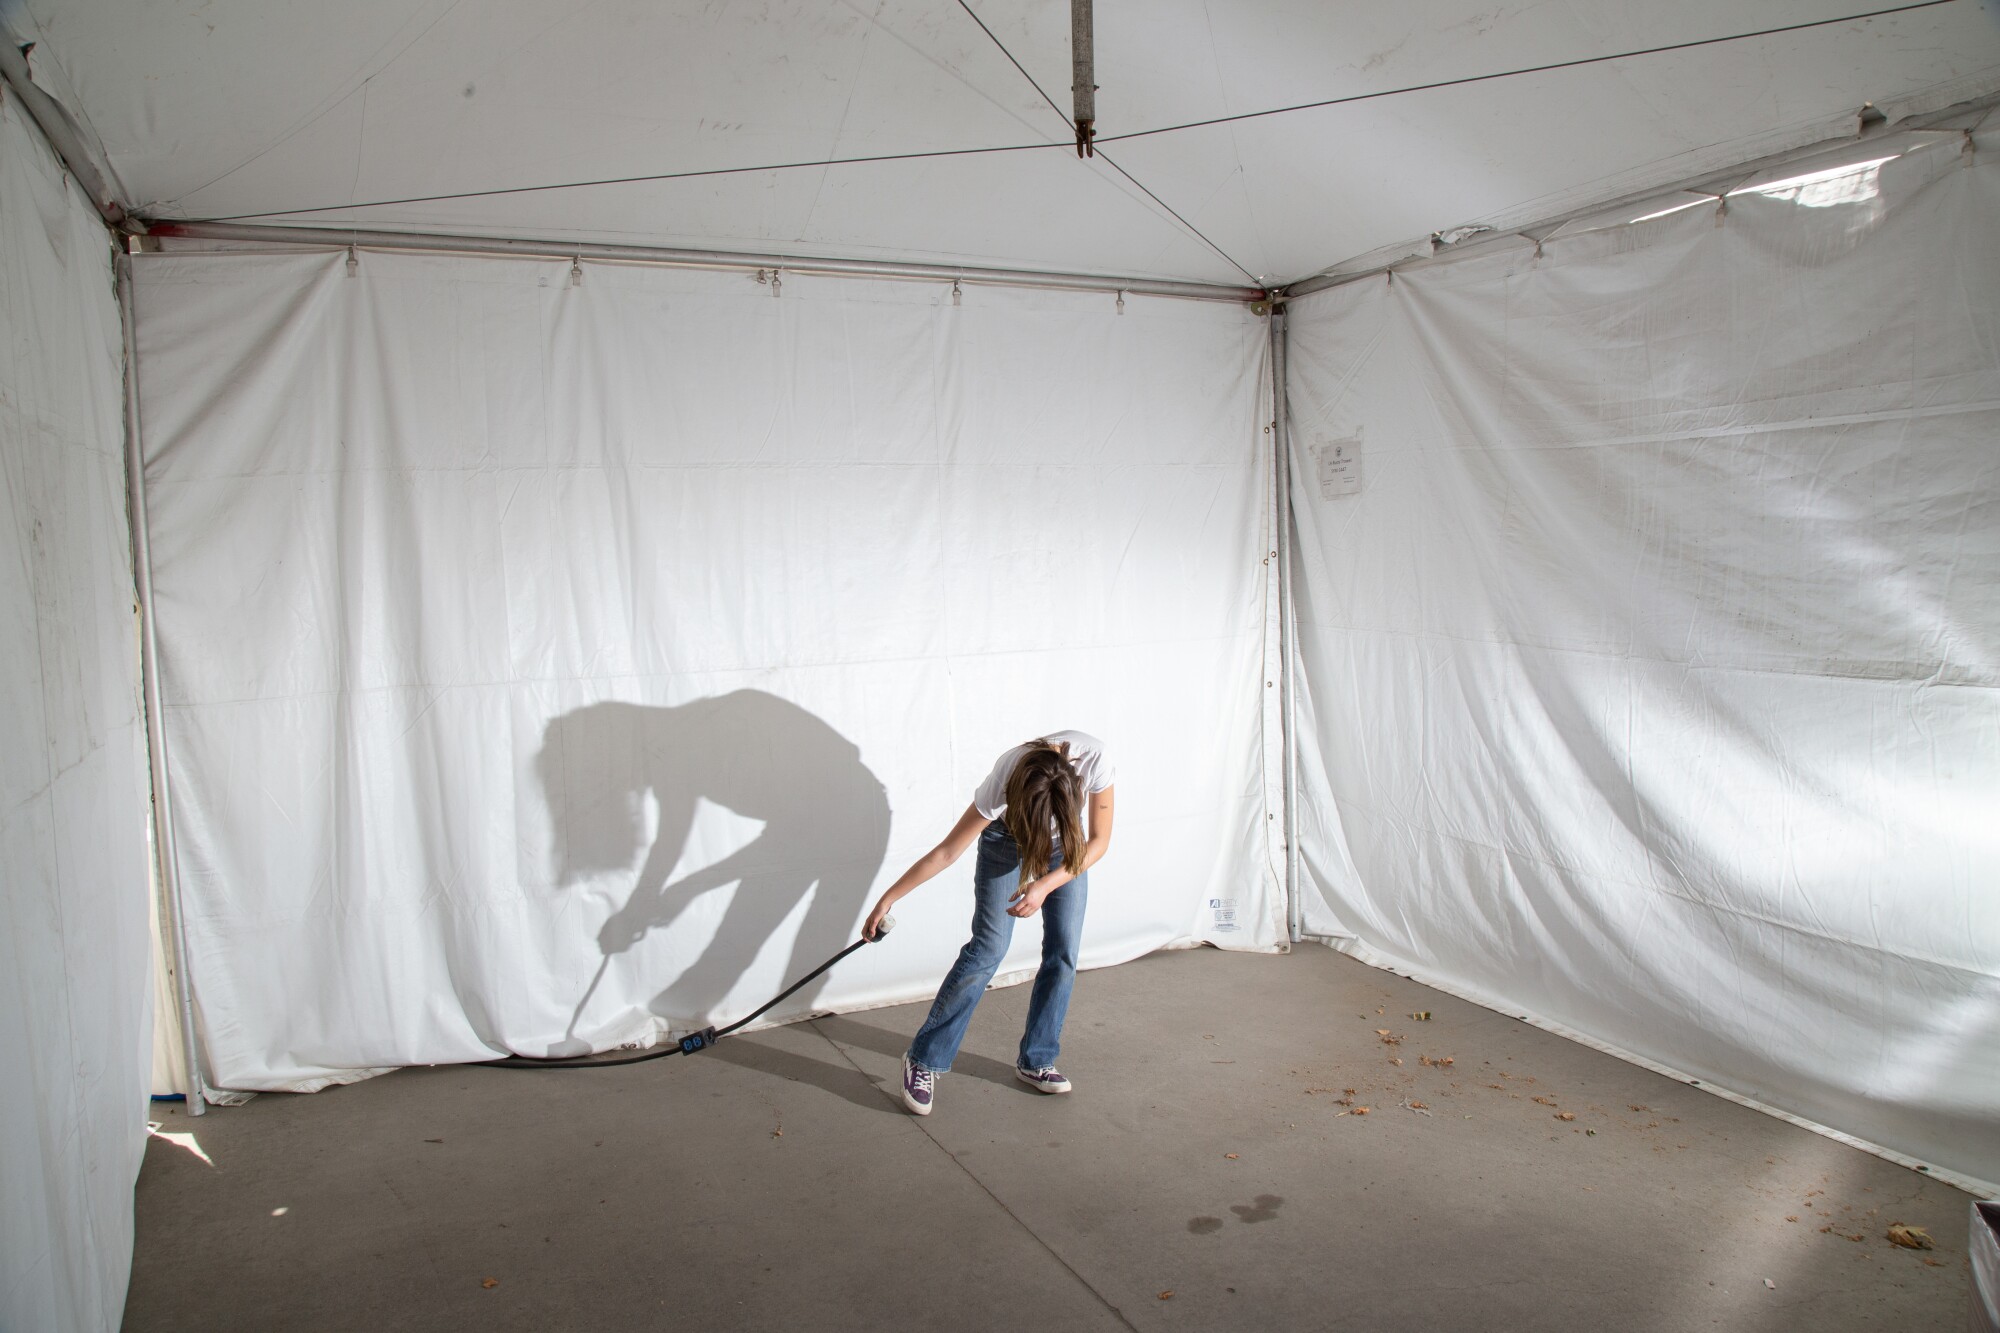 A festivalgoer poses in a pop-up tent.